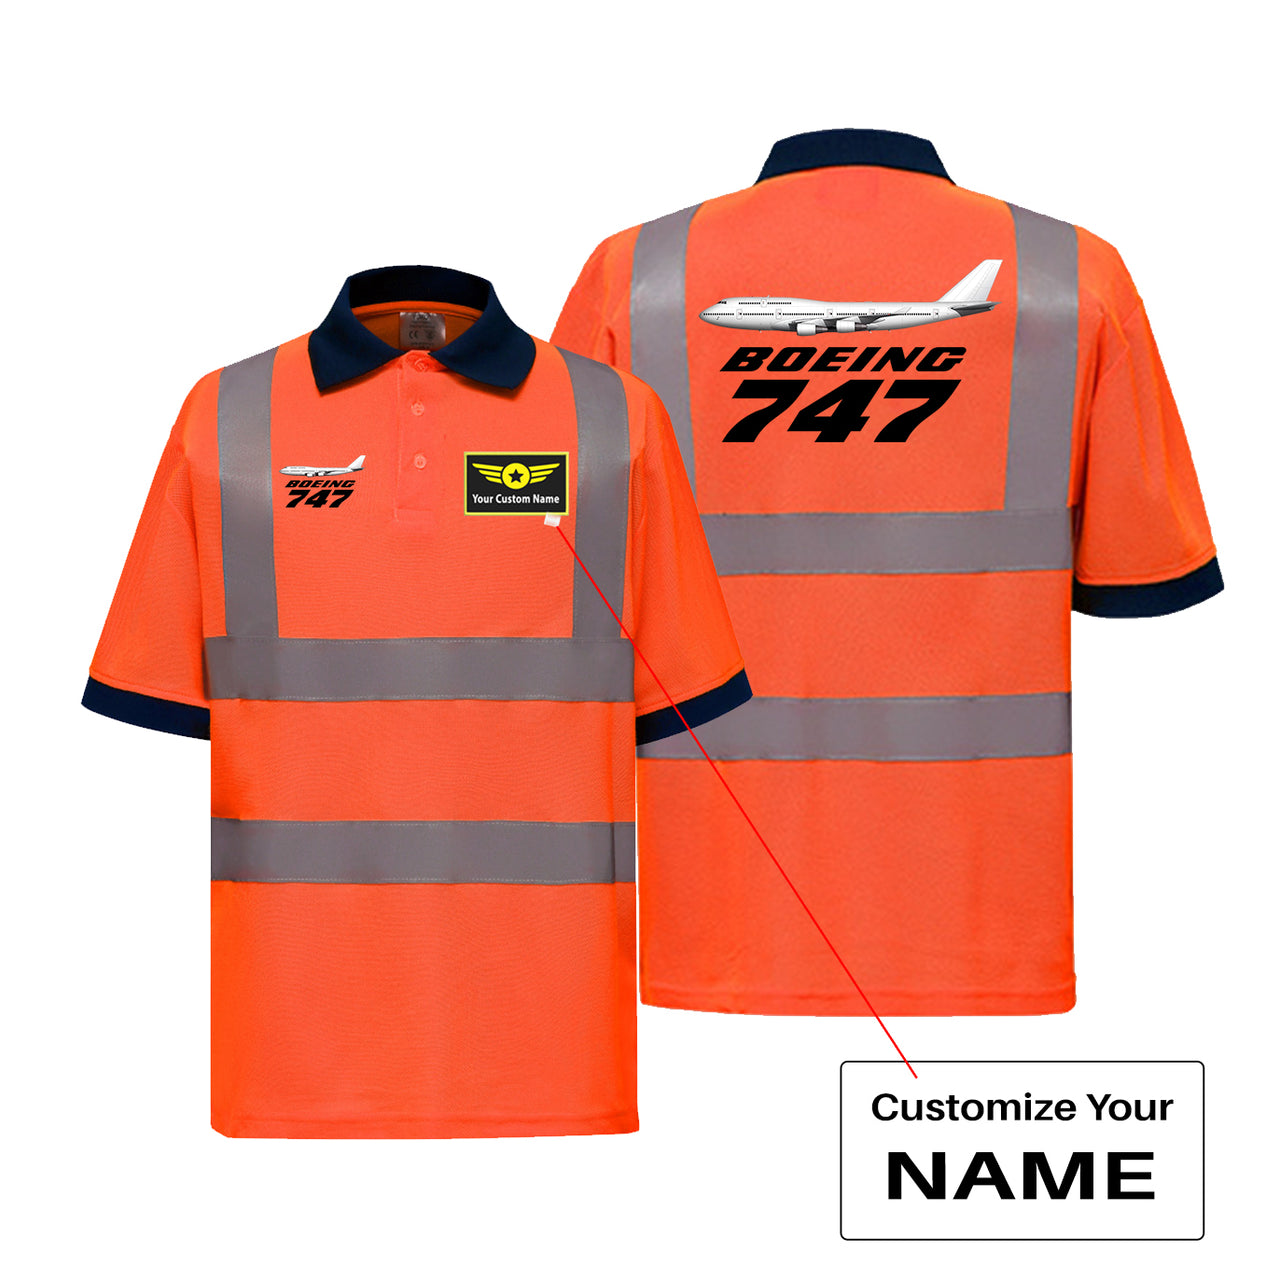 The Boeing 747 Designed Reflective Polo T-Shirts